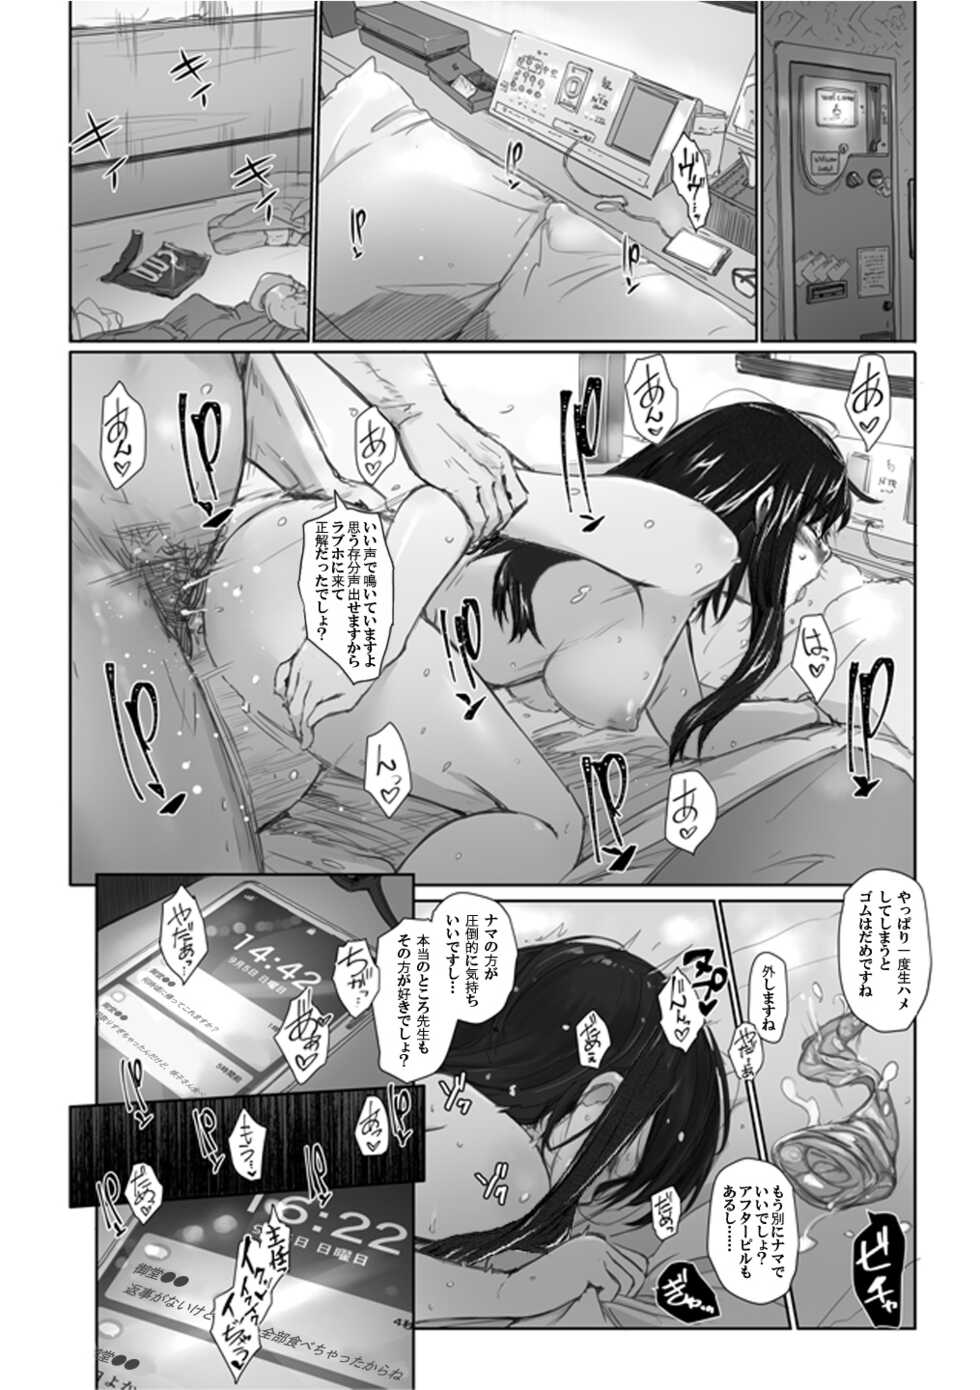 Sakiko-san in delusion Vol.7 ~Sakiko-san's circumstance at an educational training Route2~ (collage) (Continue to “First day of study trip” (page 42) of Vol.1) - Page 12